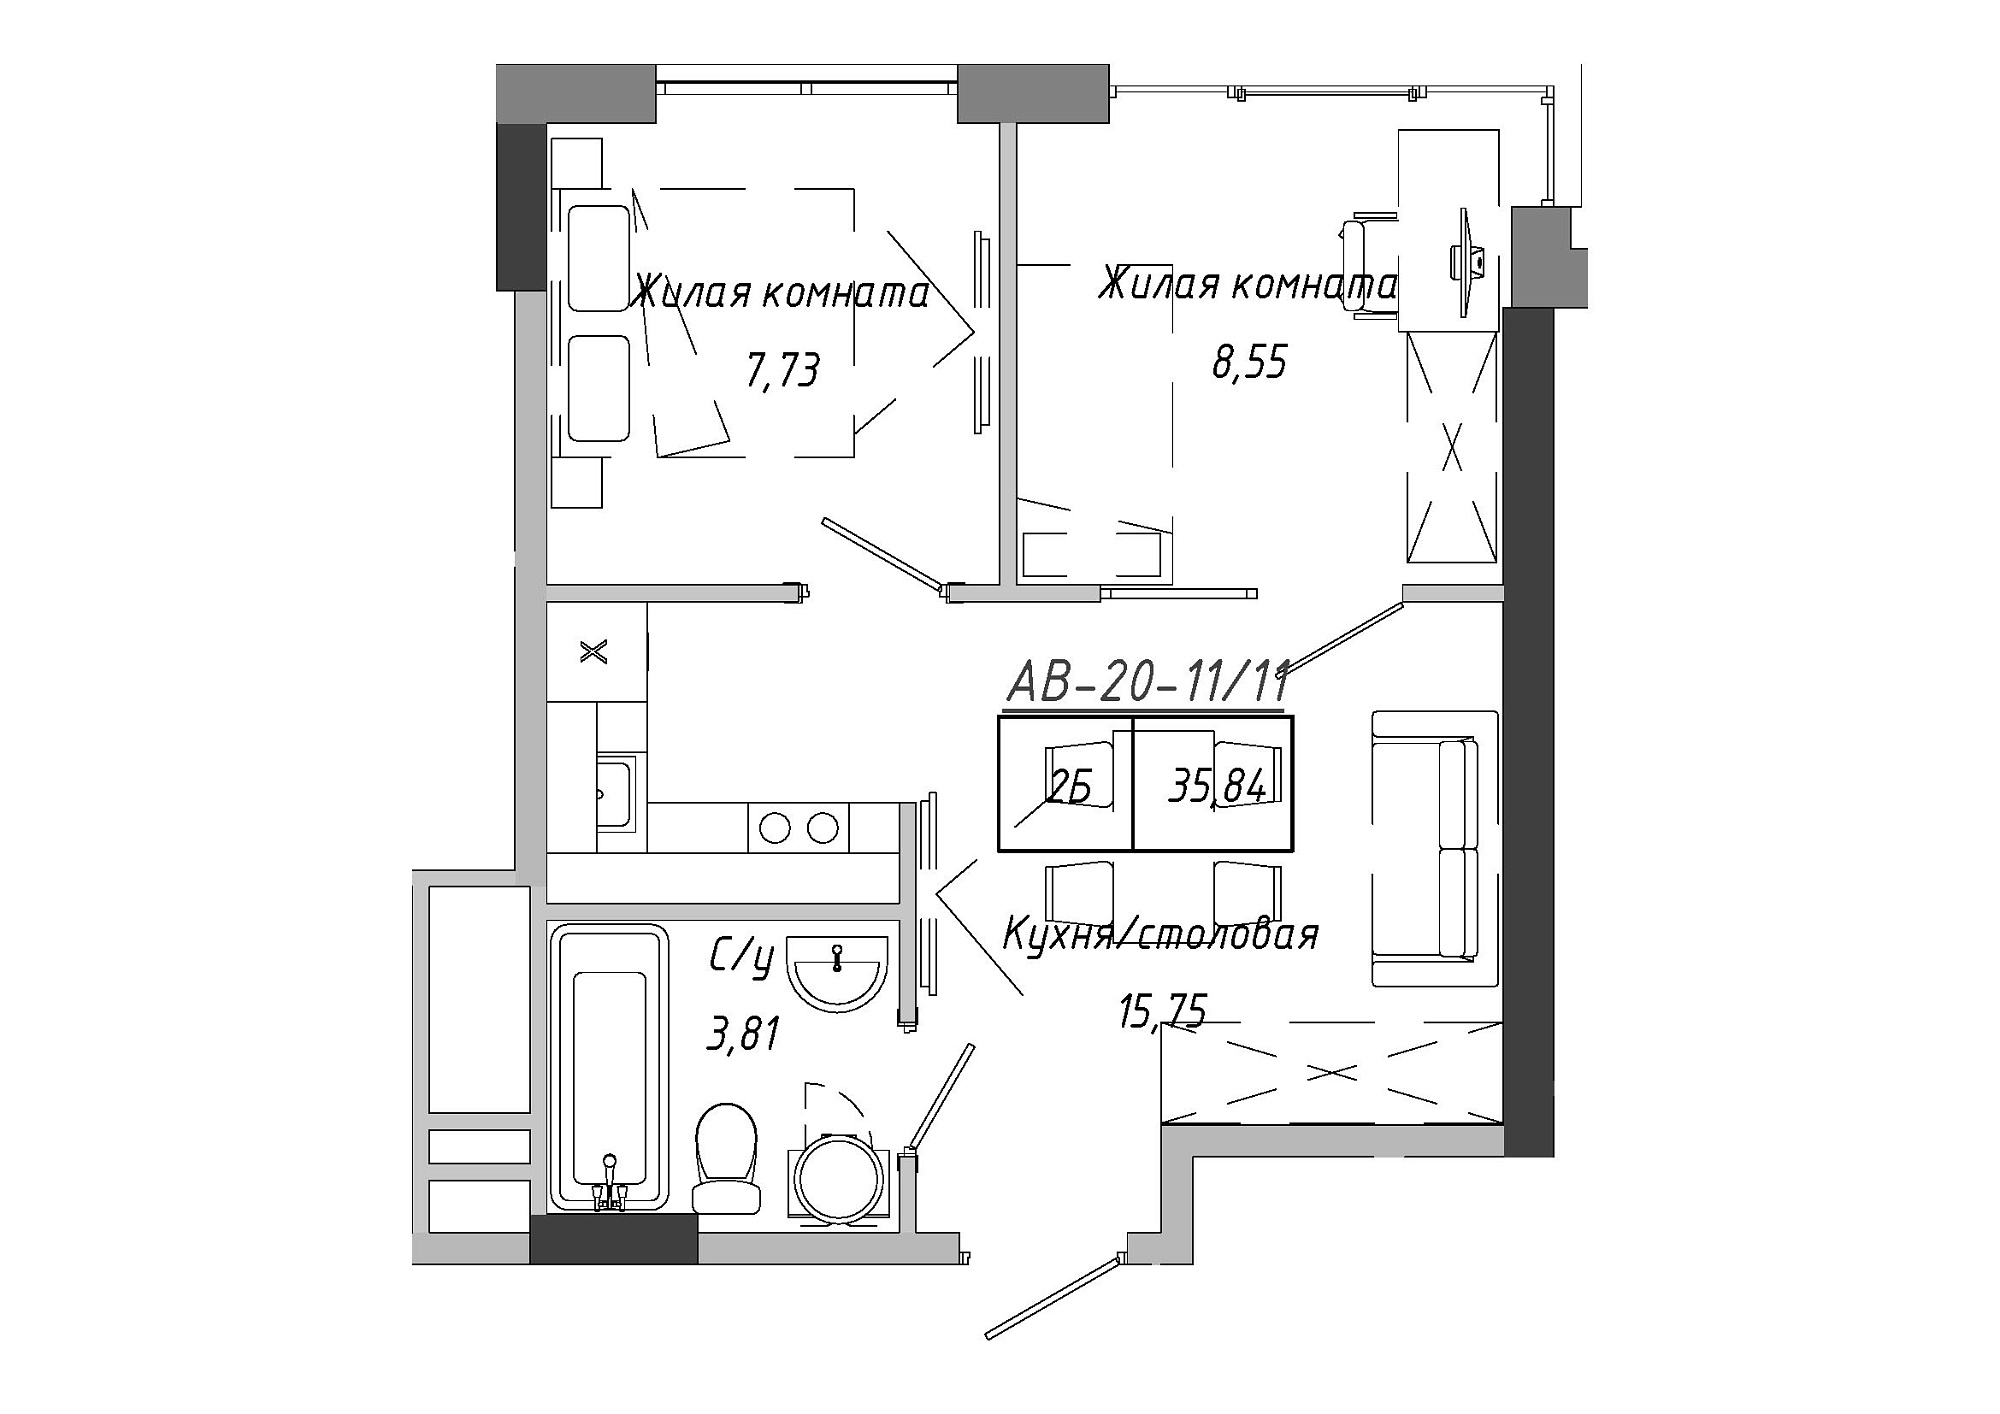 Planning 2-rm flats area 36.12m2, AB-20-11/00011.